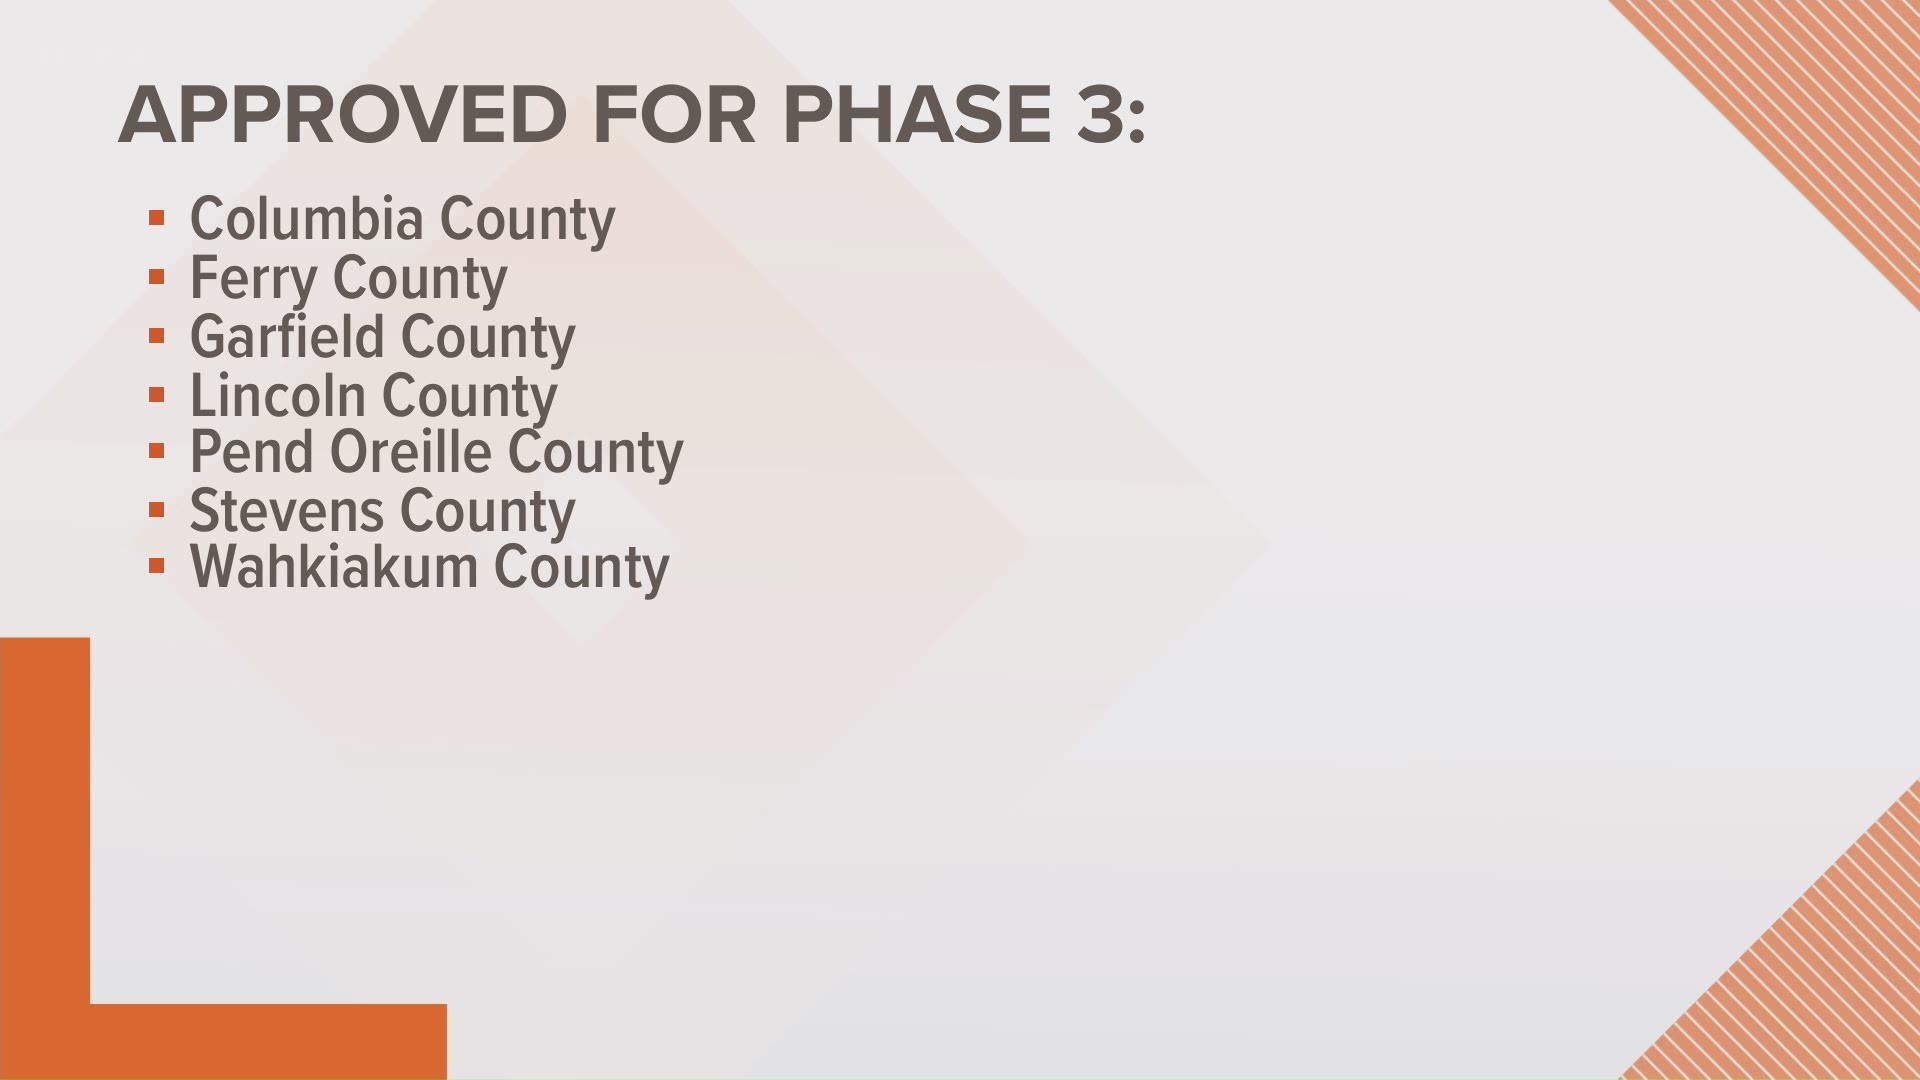 Fourteen new counties have been approved to move on to Phase 2 and seven for Phase 3 of the reopening plan.